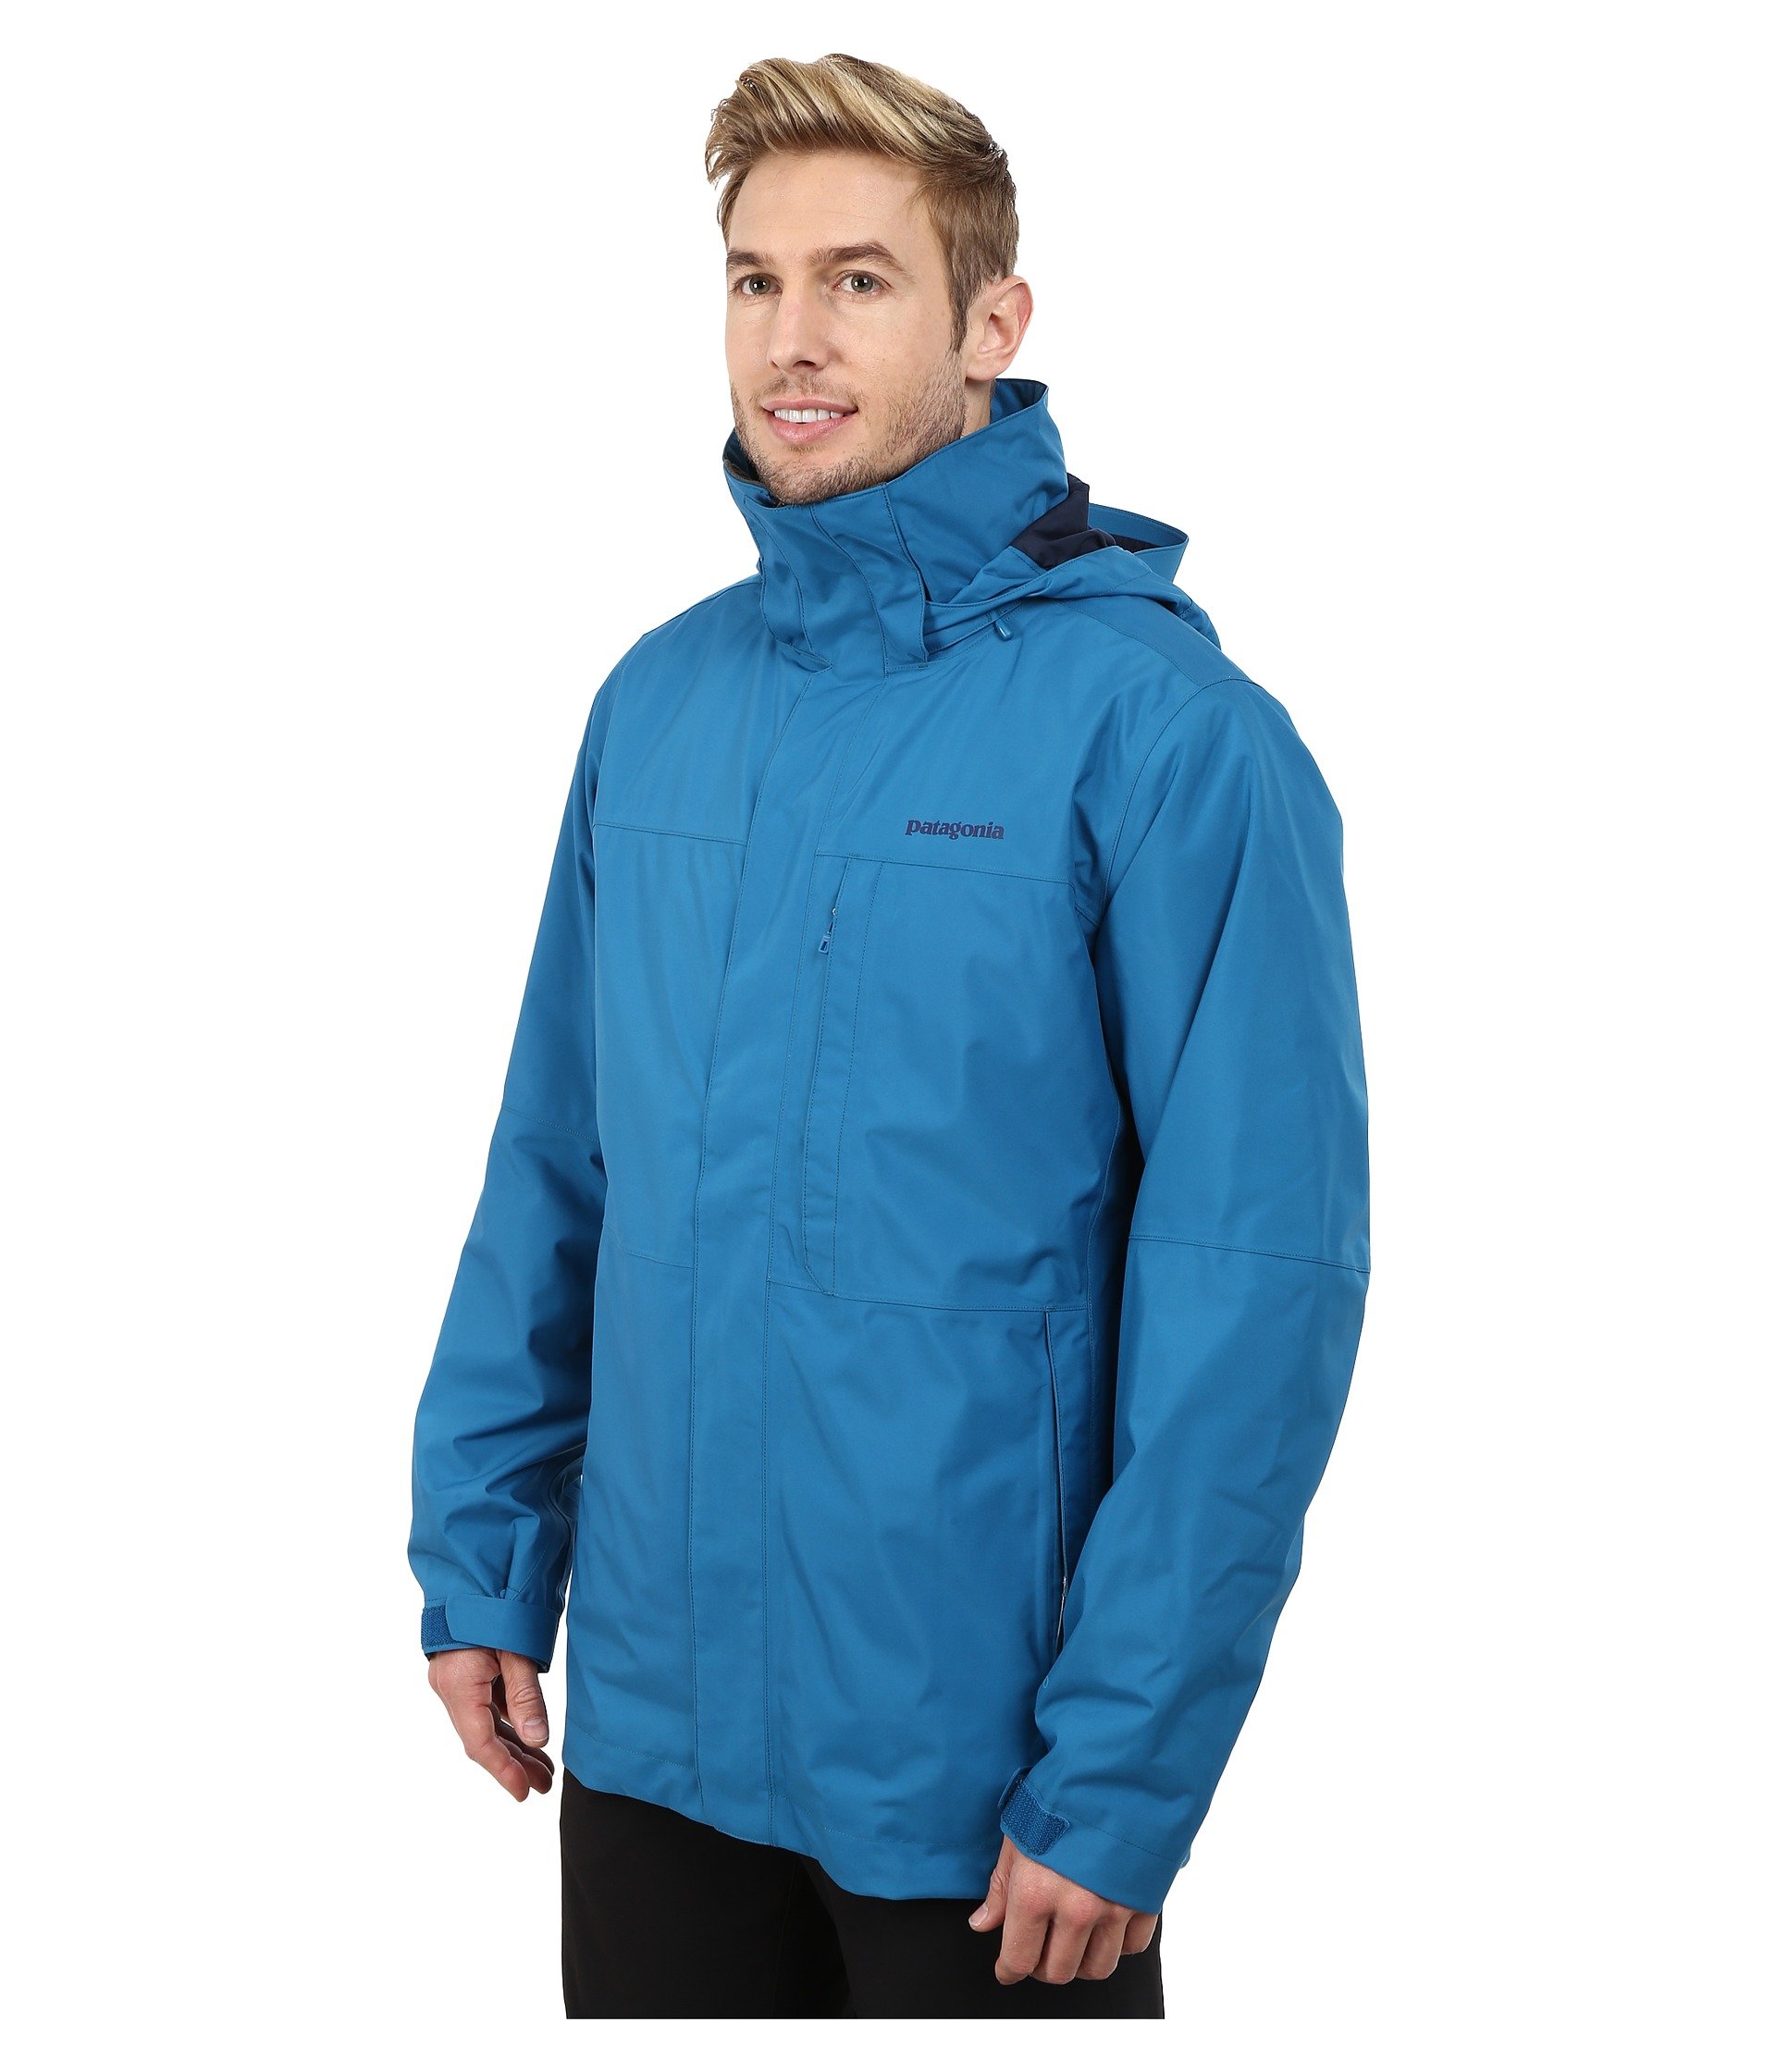 Patagonia Synthetic 3-in-1 Snowshot Jacket in Blue for Men - Lyst